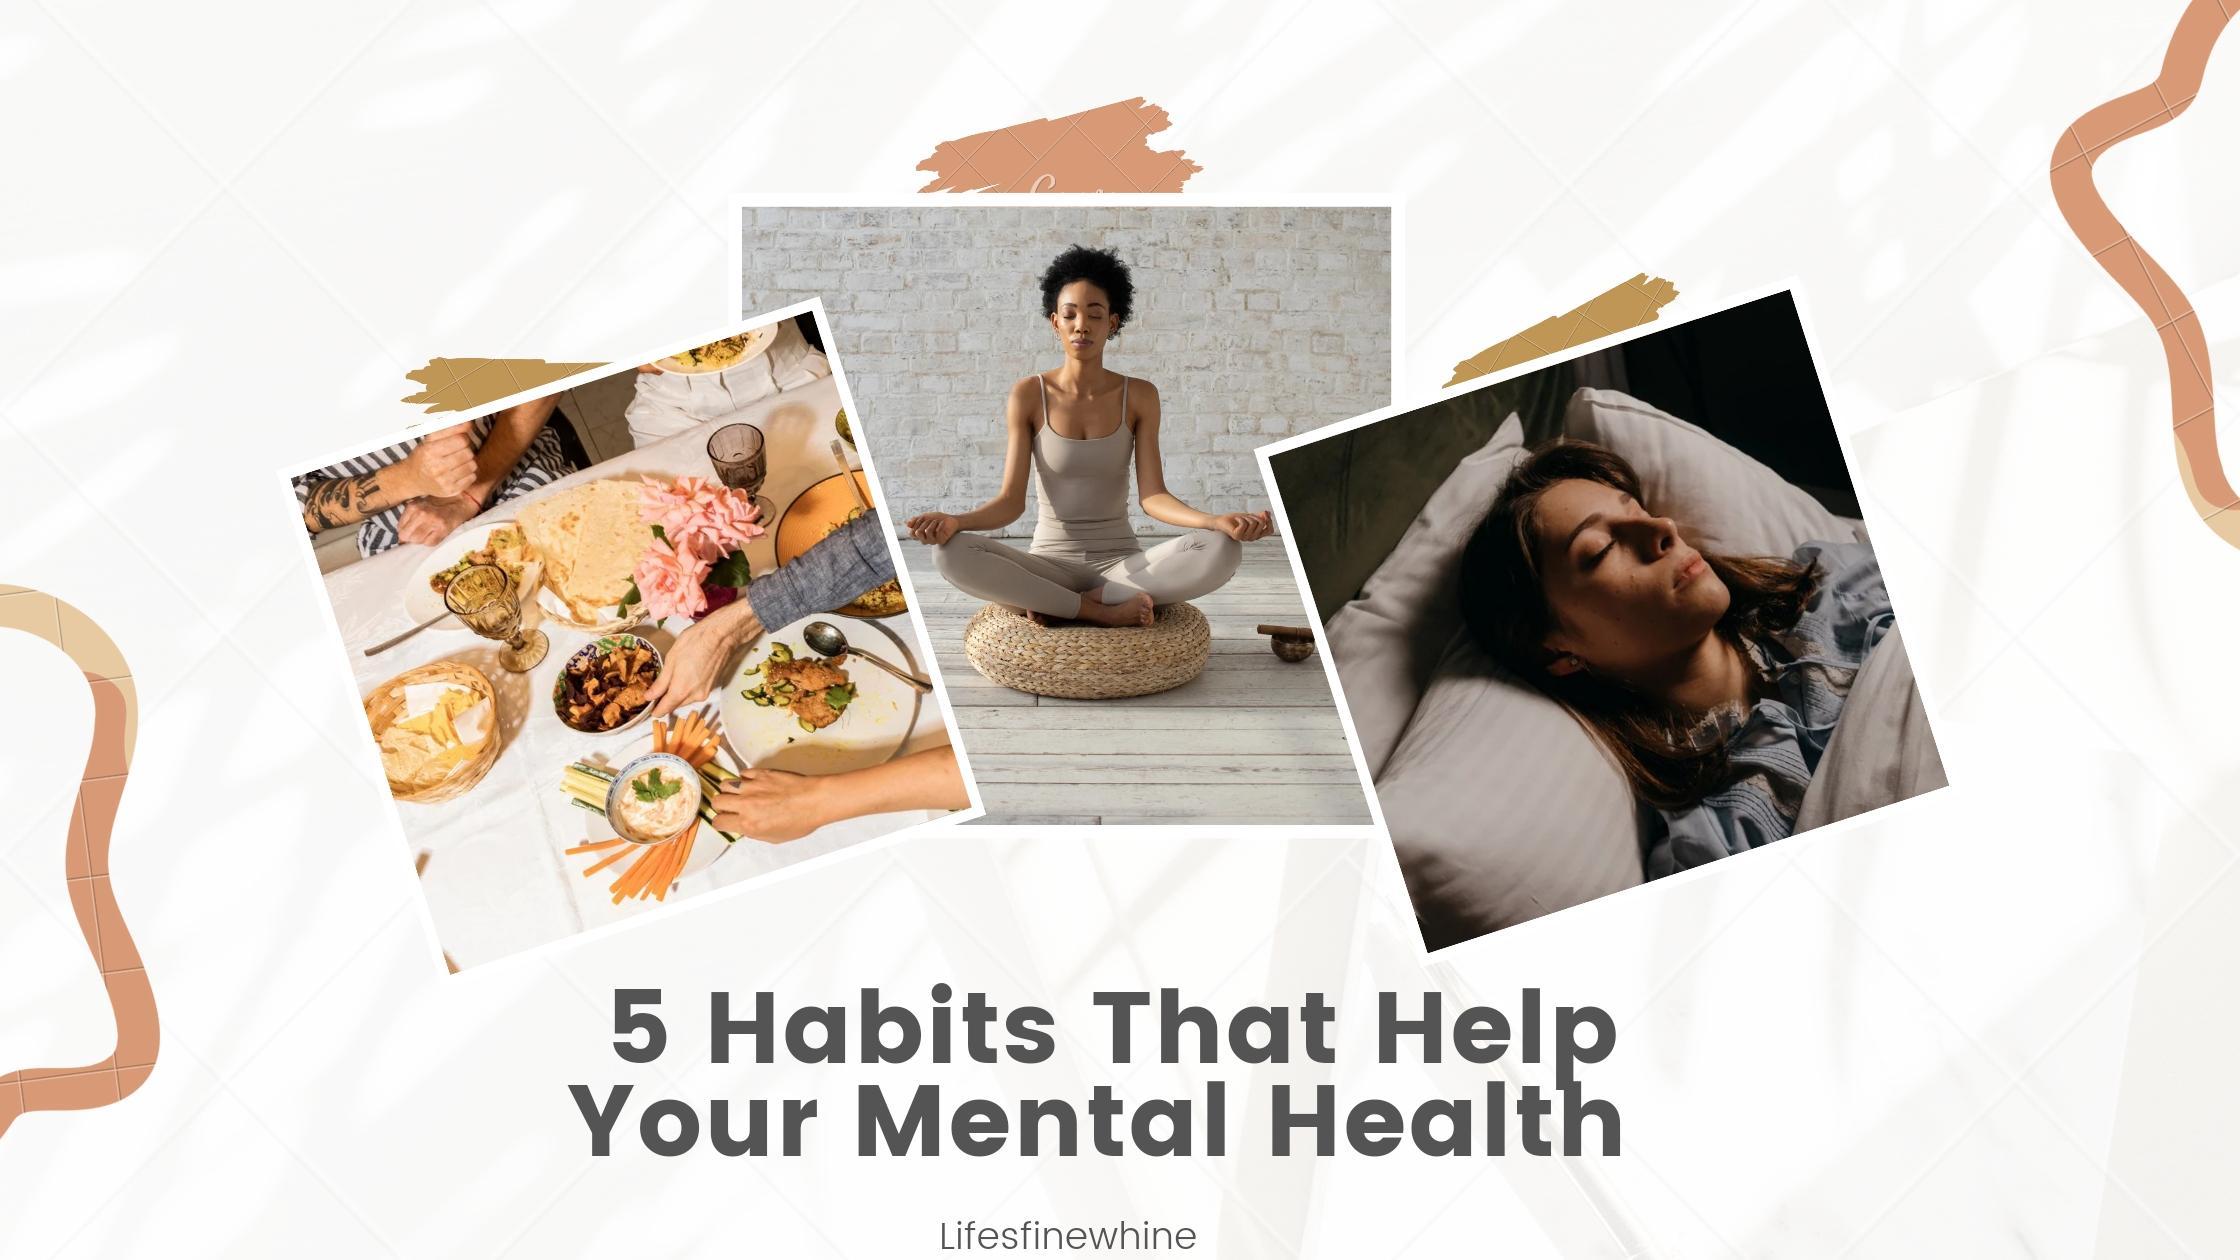 5 Habits That Help Your Mental Health